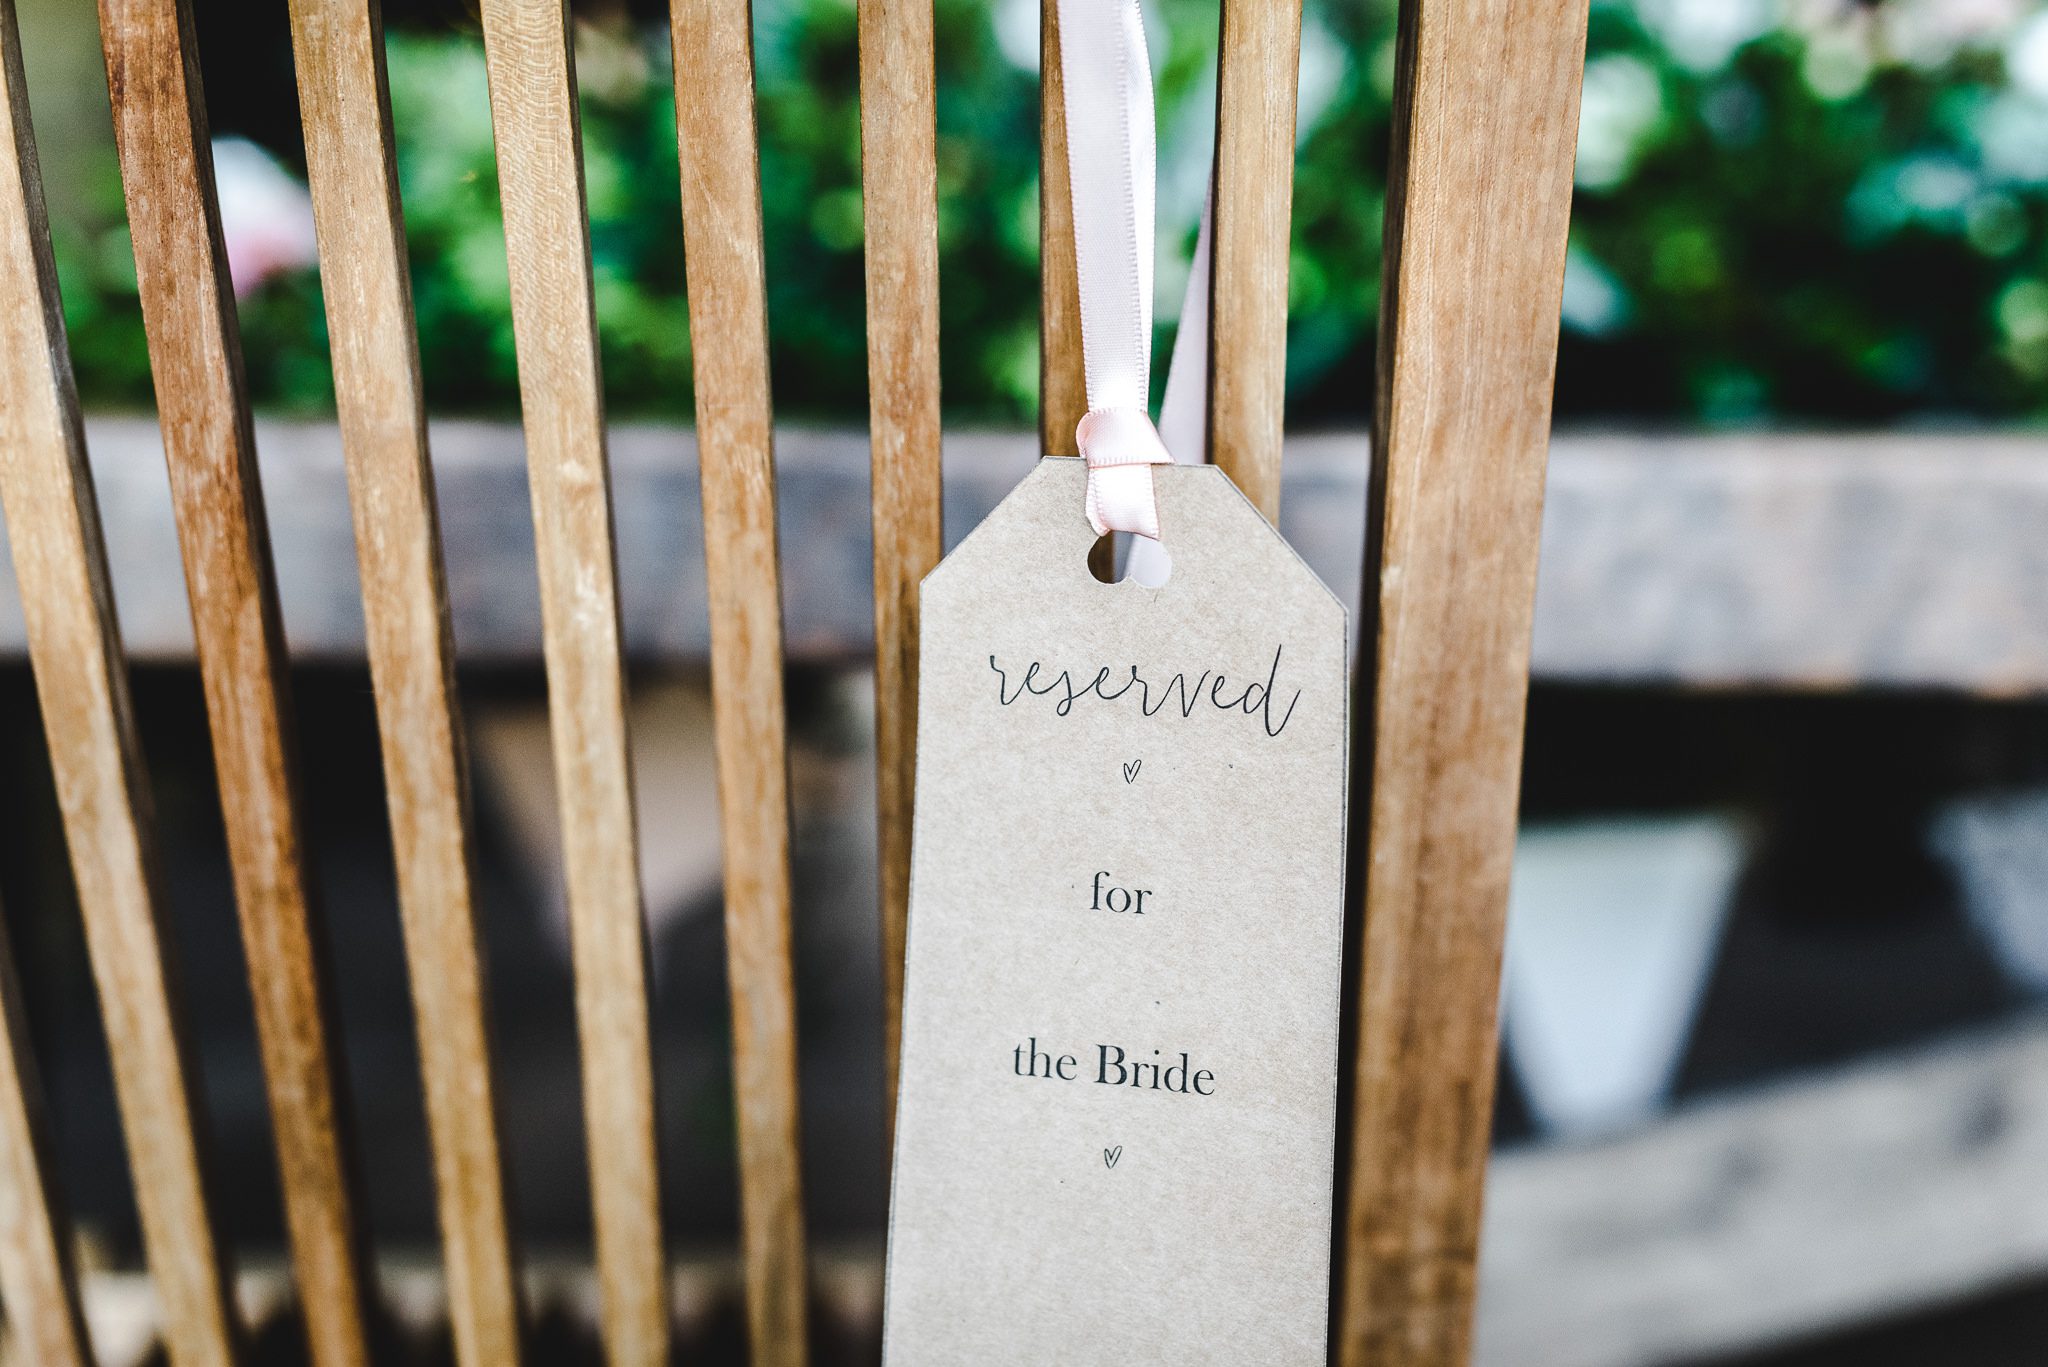 A reserved for the bride label on a chair